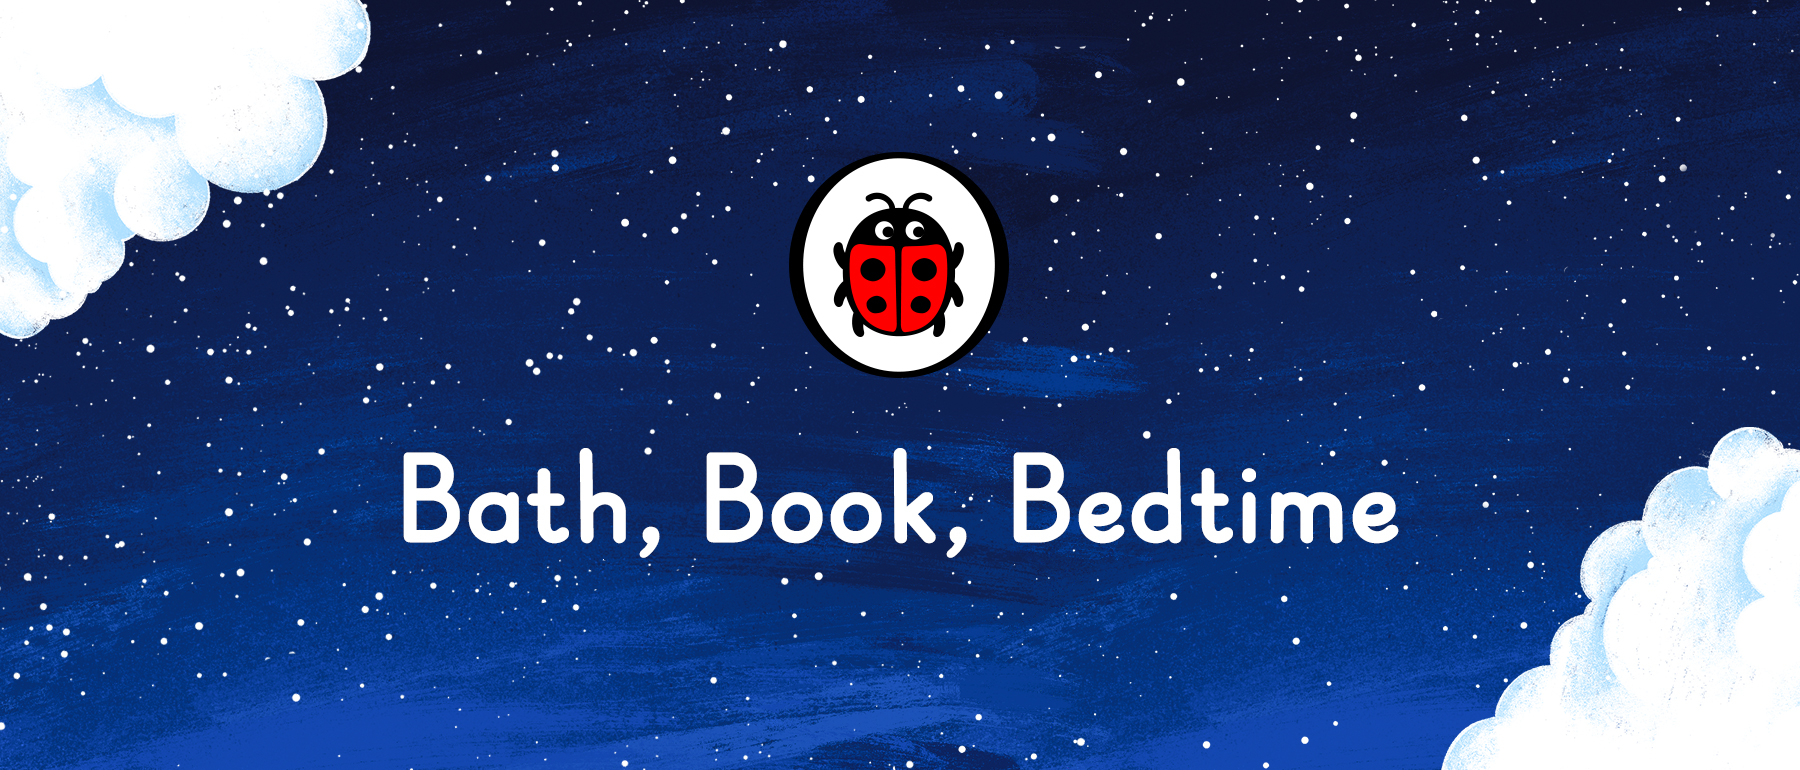 An image with the words Bath, Book, Bedtime on a night sky background, surrounded by clouds and with the Ladybird logo sitting in the centre at the top